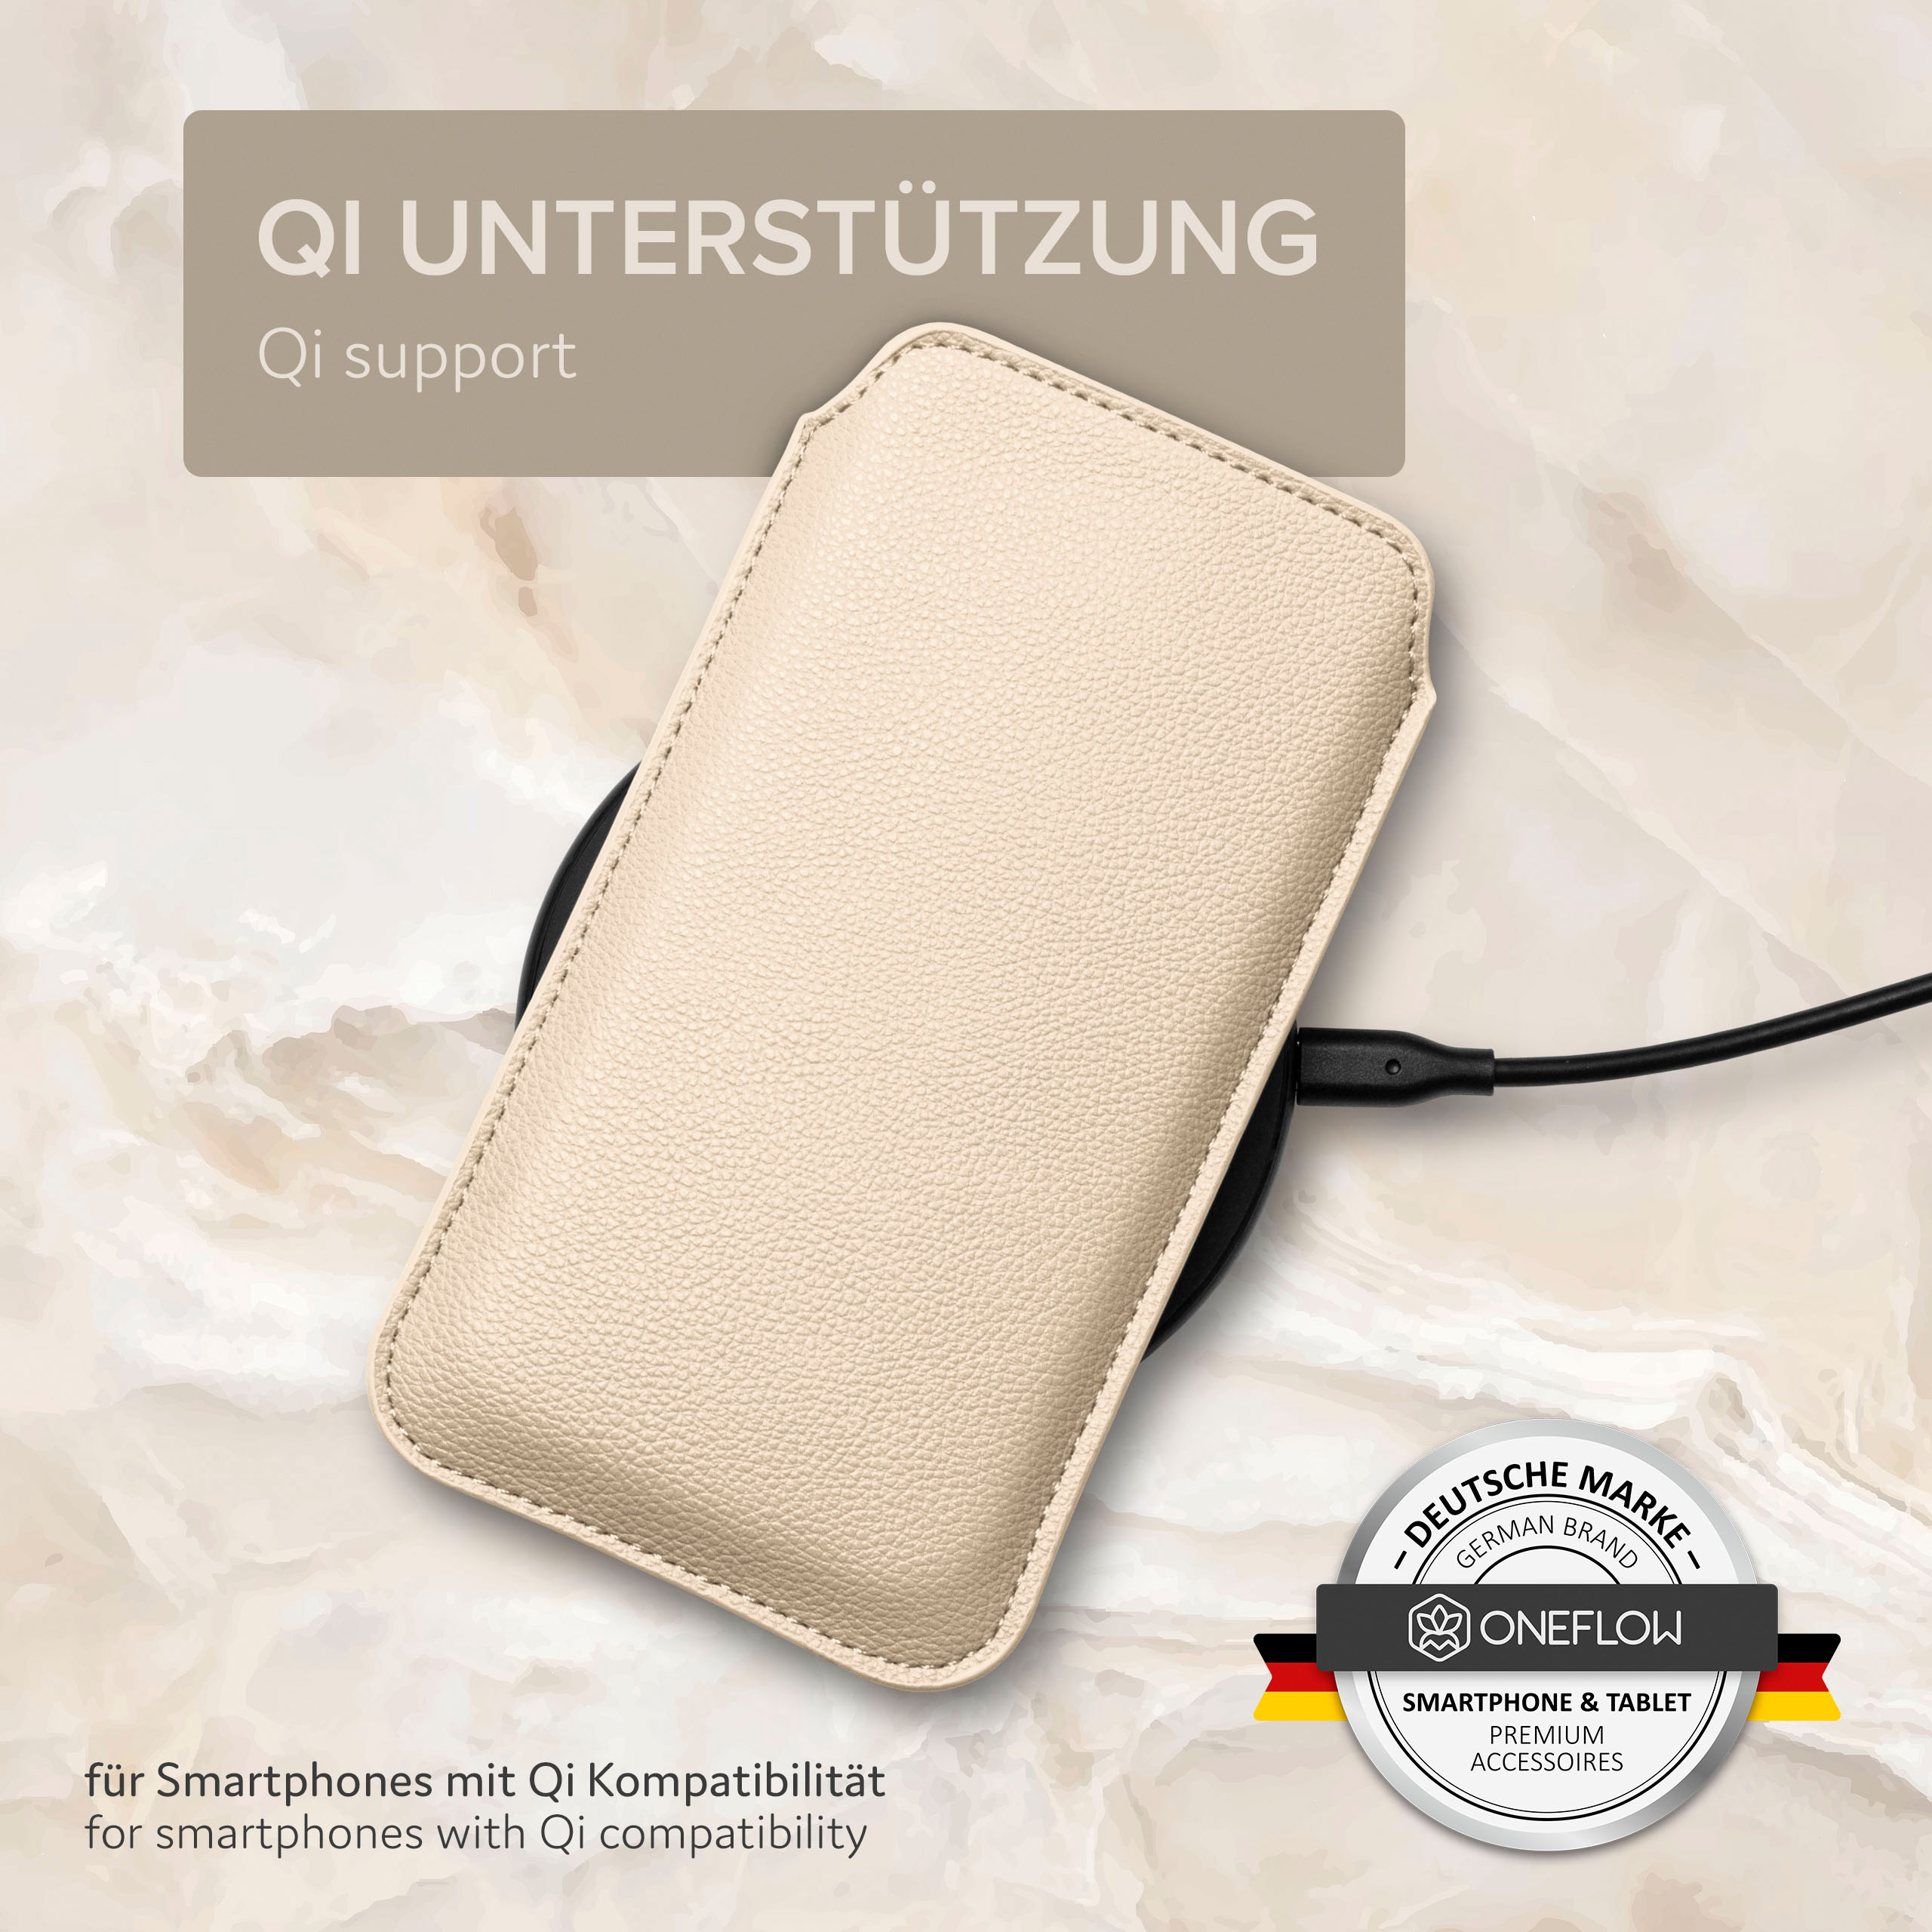 ONEFLOW Einsteckhülle mit Full Z1 Xperia Compact, Zuglasche, Sony, Creme Cover